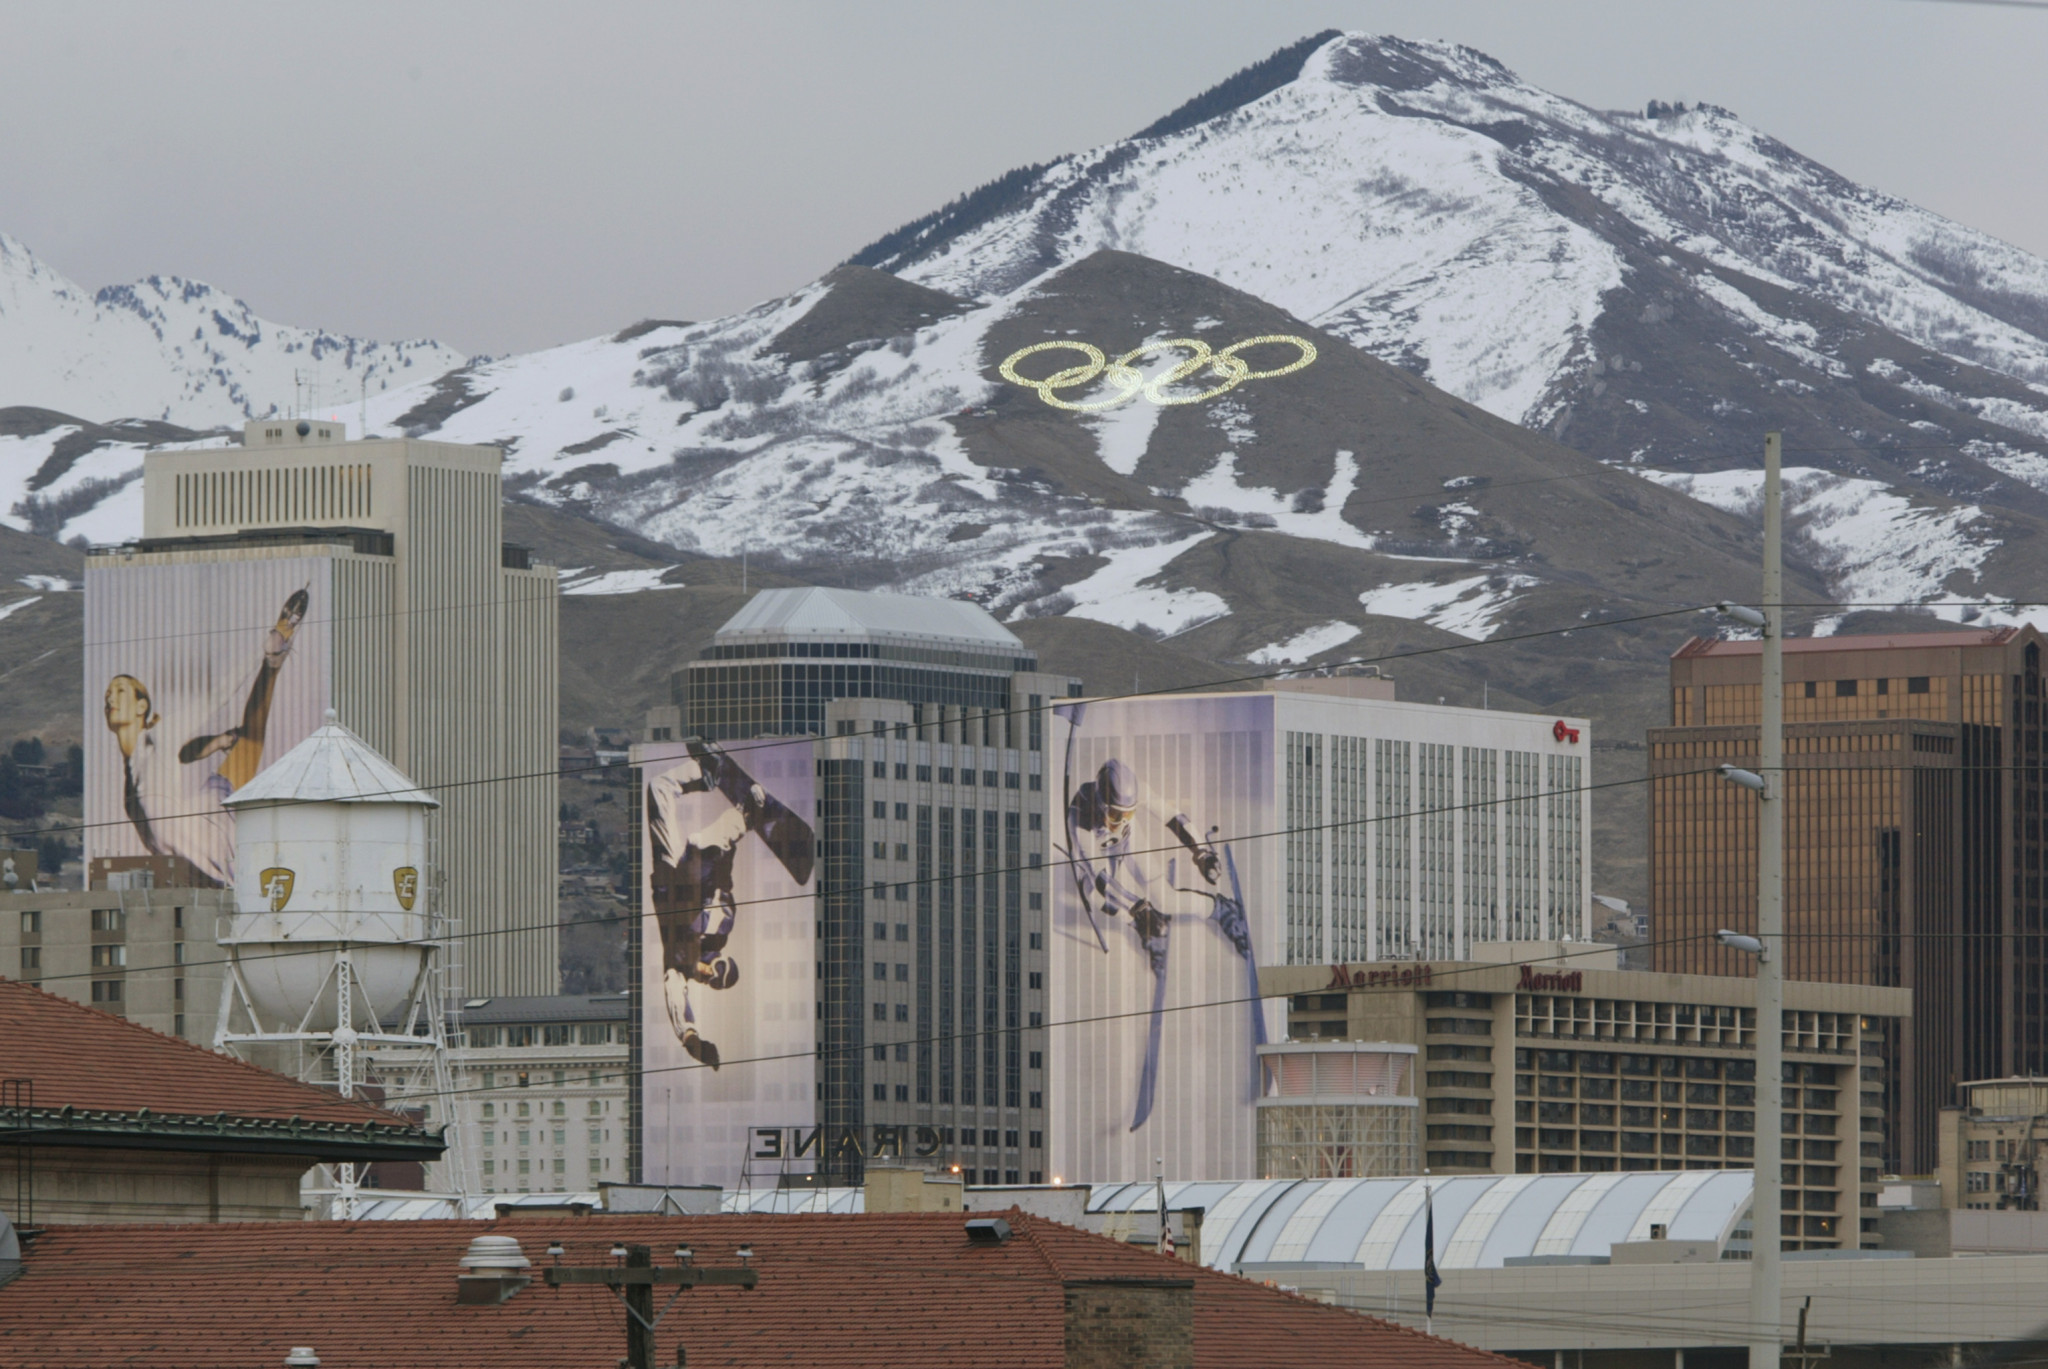 Salt Lake City bid President claims ready to host Games "in the best interest of the Olympic Movement"